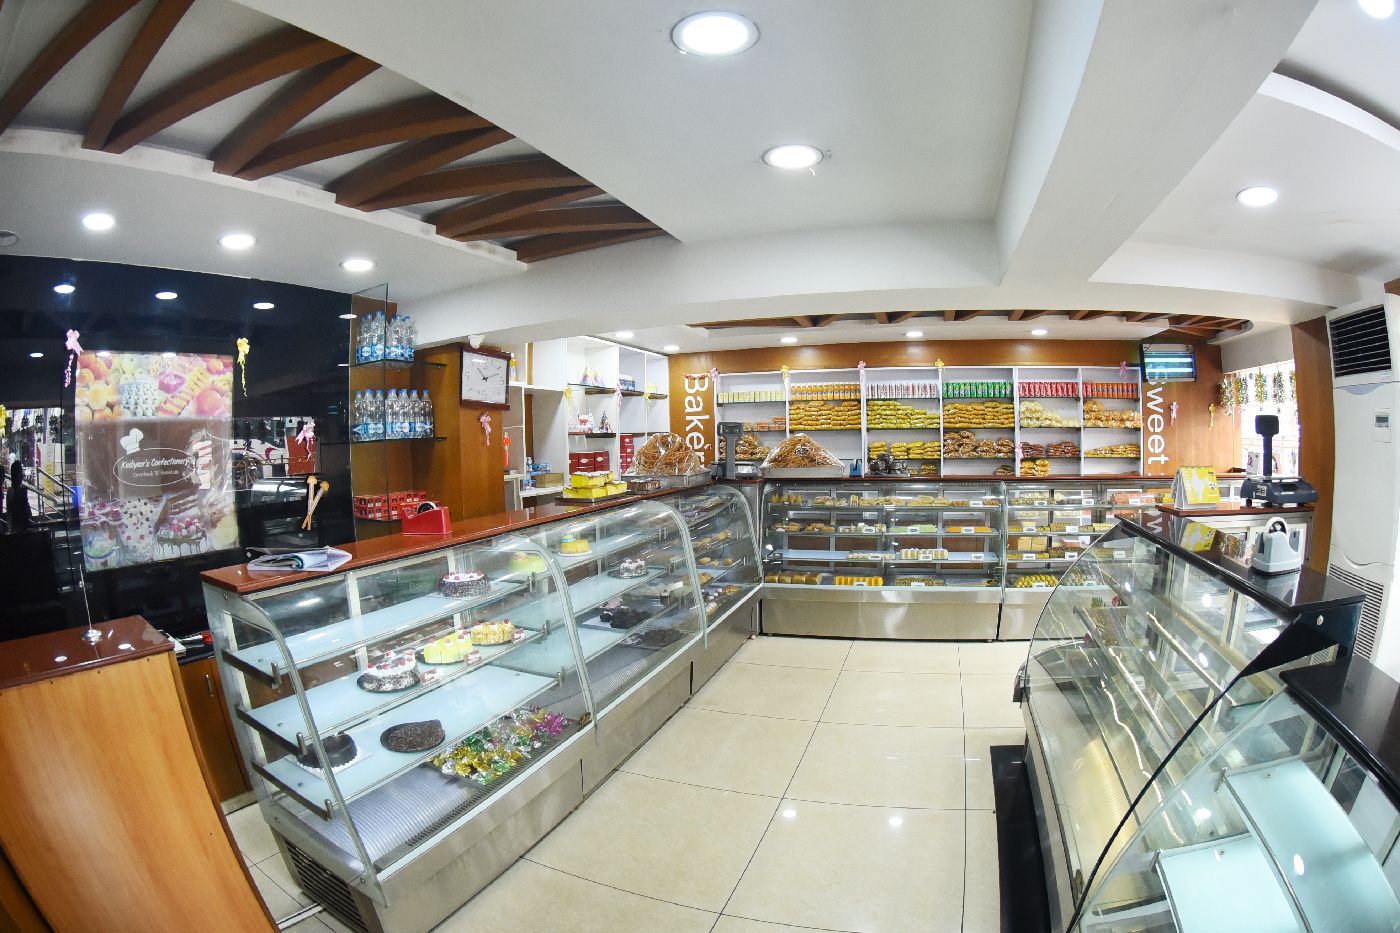 We invite you to visit our Confectionary